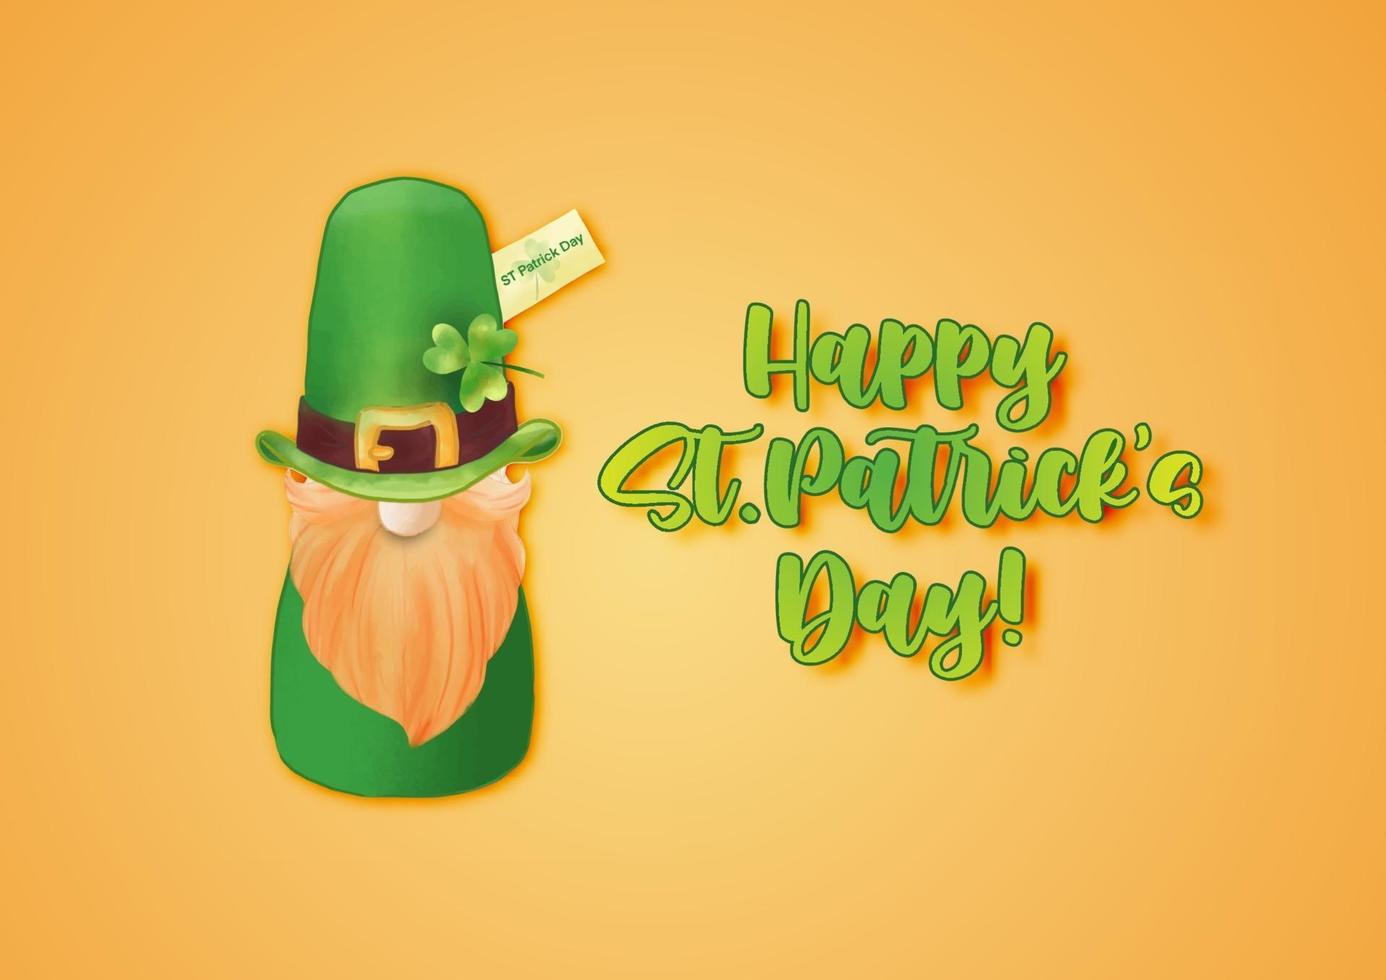 Happy St. Patrick's Day Background Vector illustration